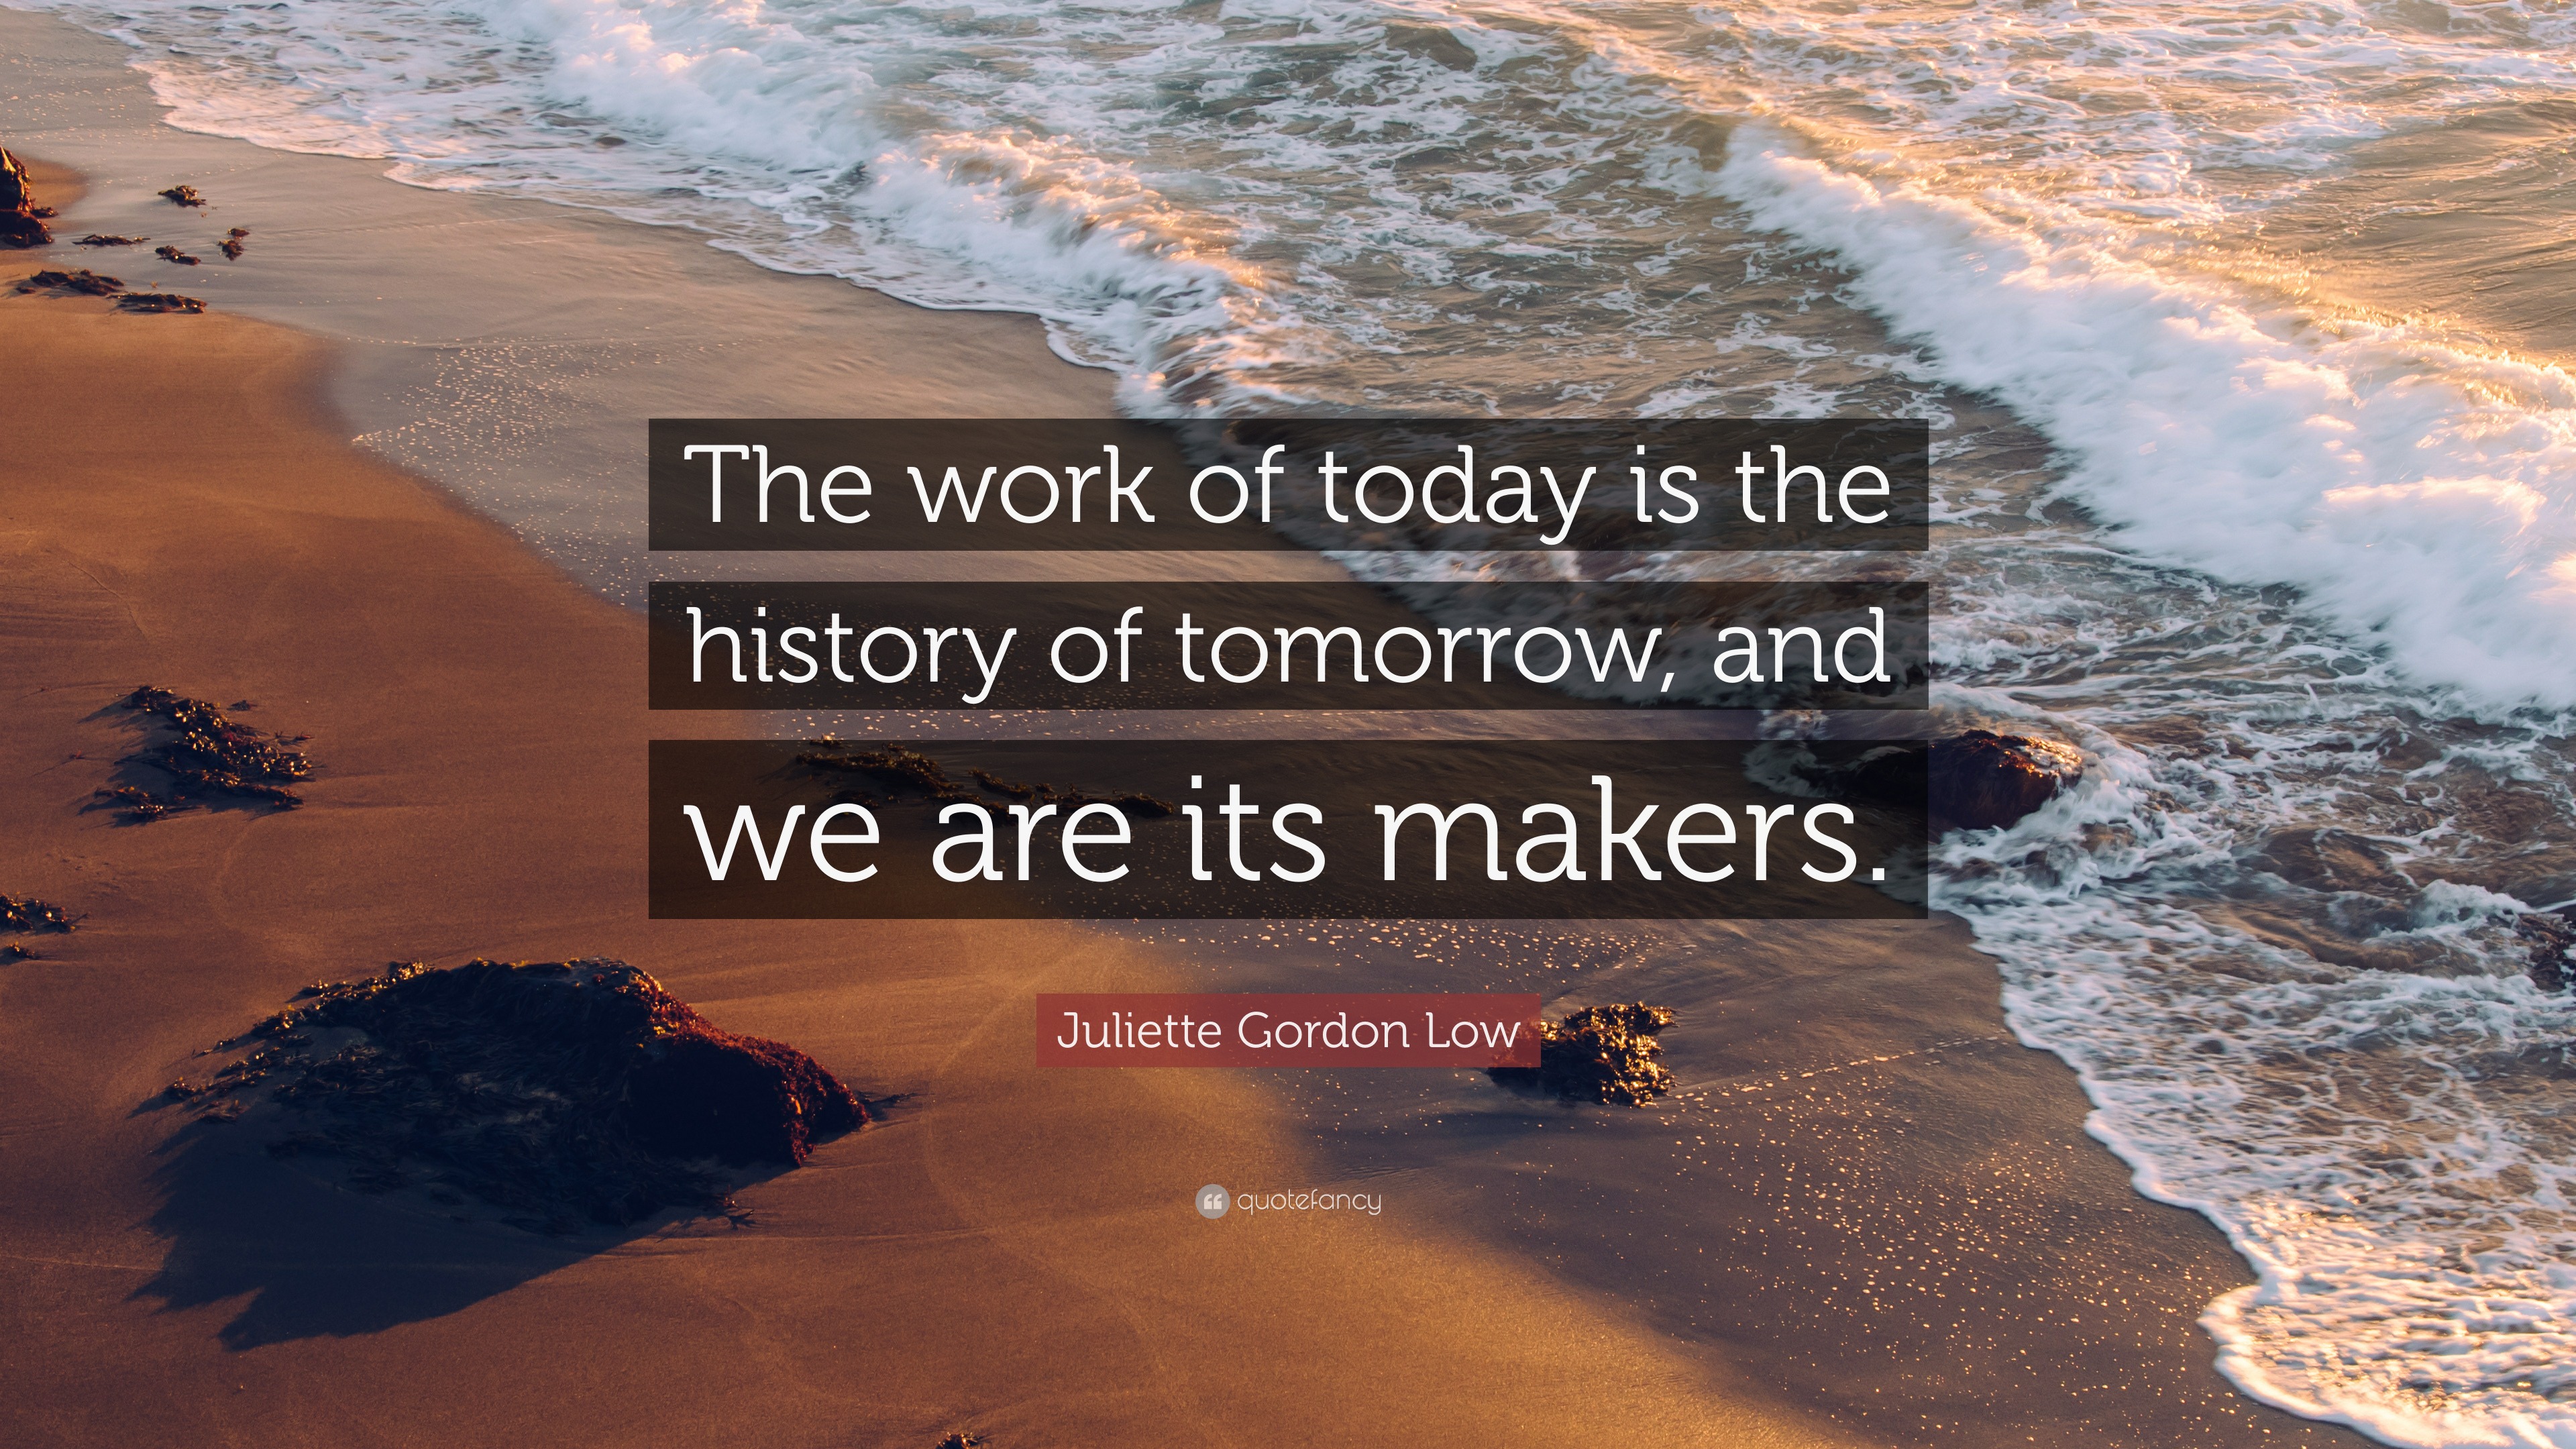 Juliette Gordon Low Quote: “The work of today is the history of